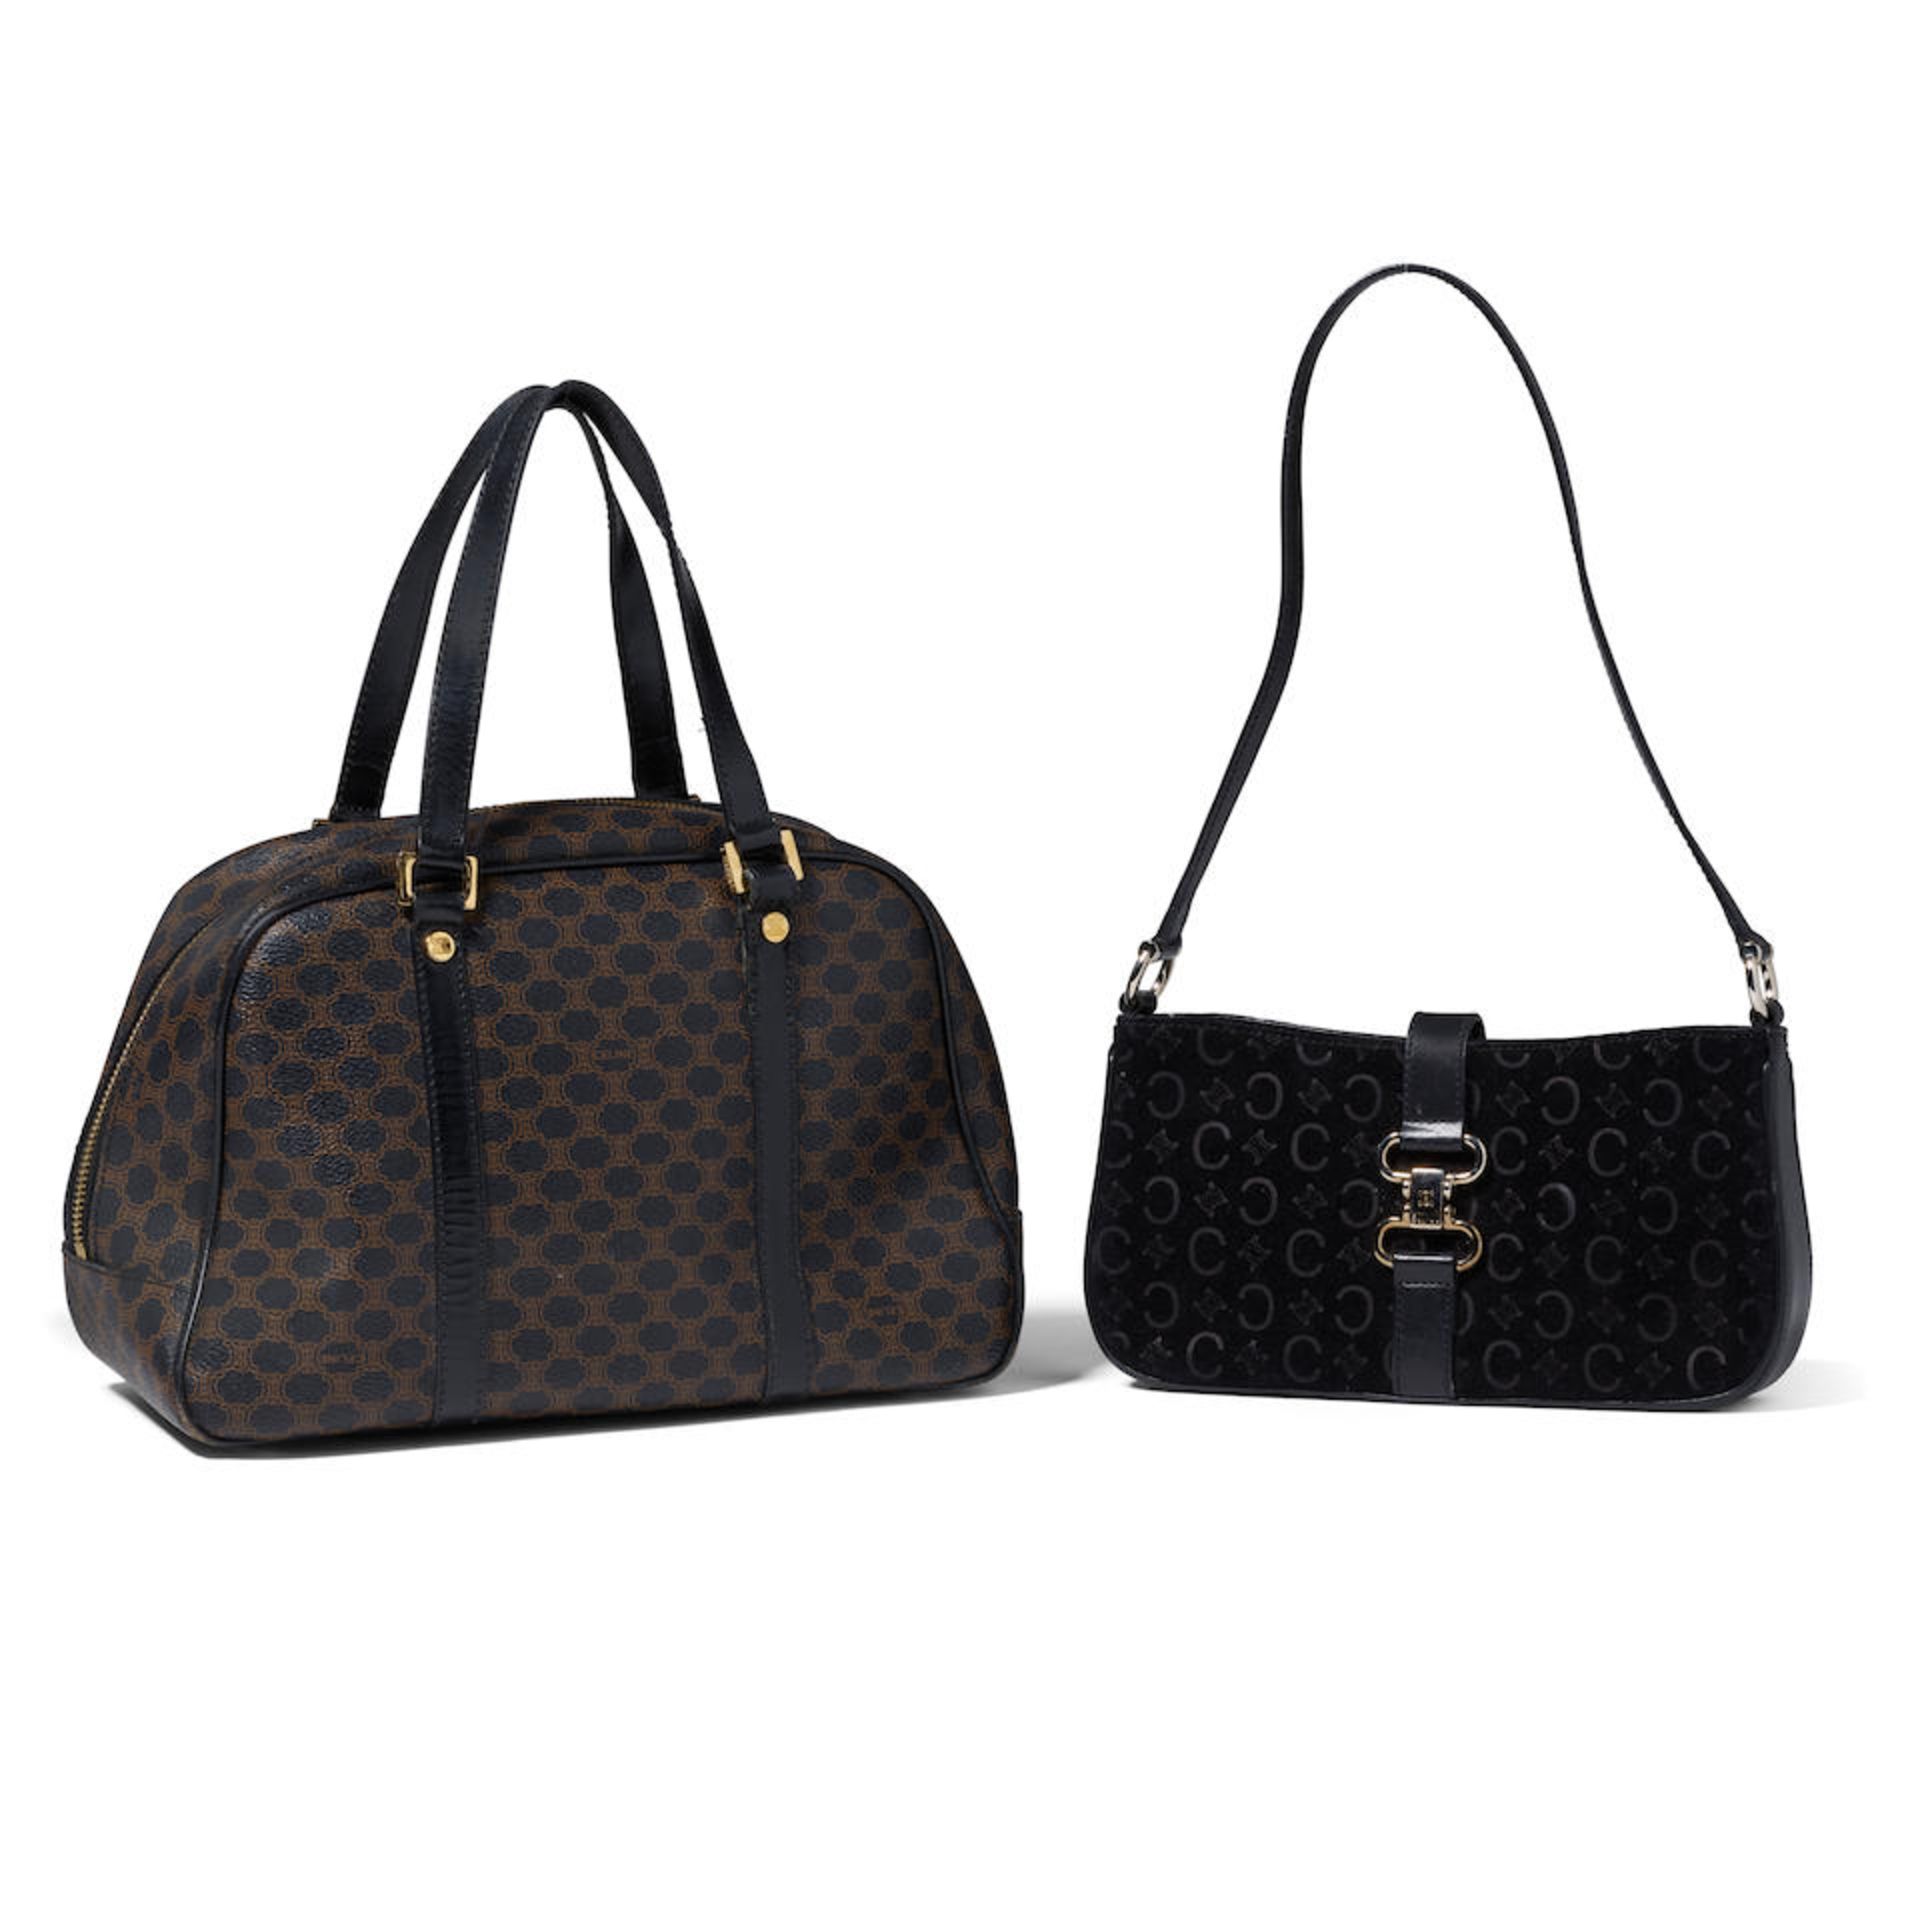 CELINE: GROUP OF TWO BAGS